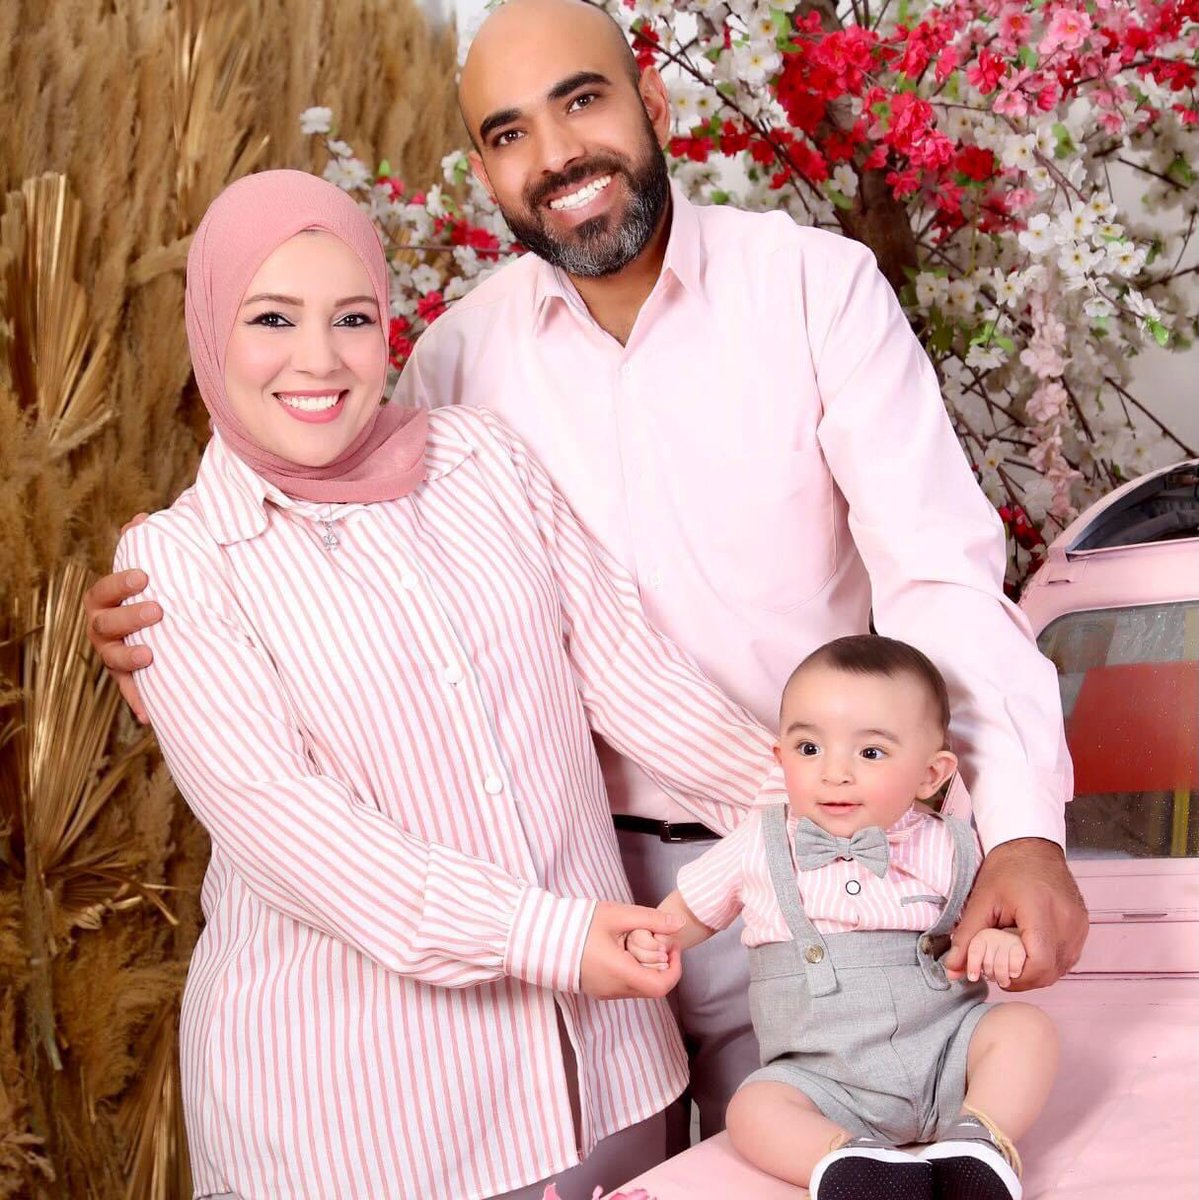 This is Salma Abu Shawar and her family. In her last post, she wrote, “If I’m gone and there is no news about me, my wish is that you keep me in your prayers.” Salma is gone today.